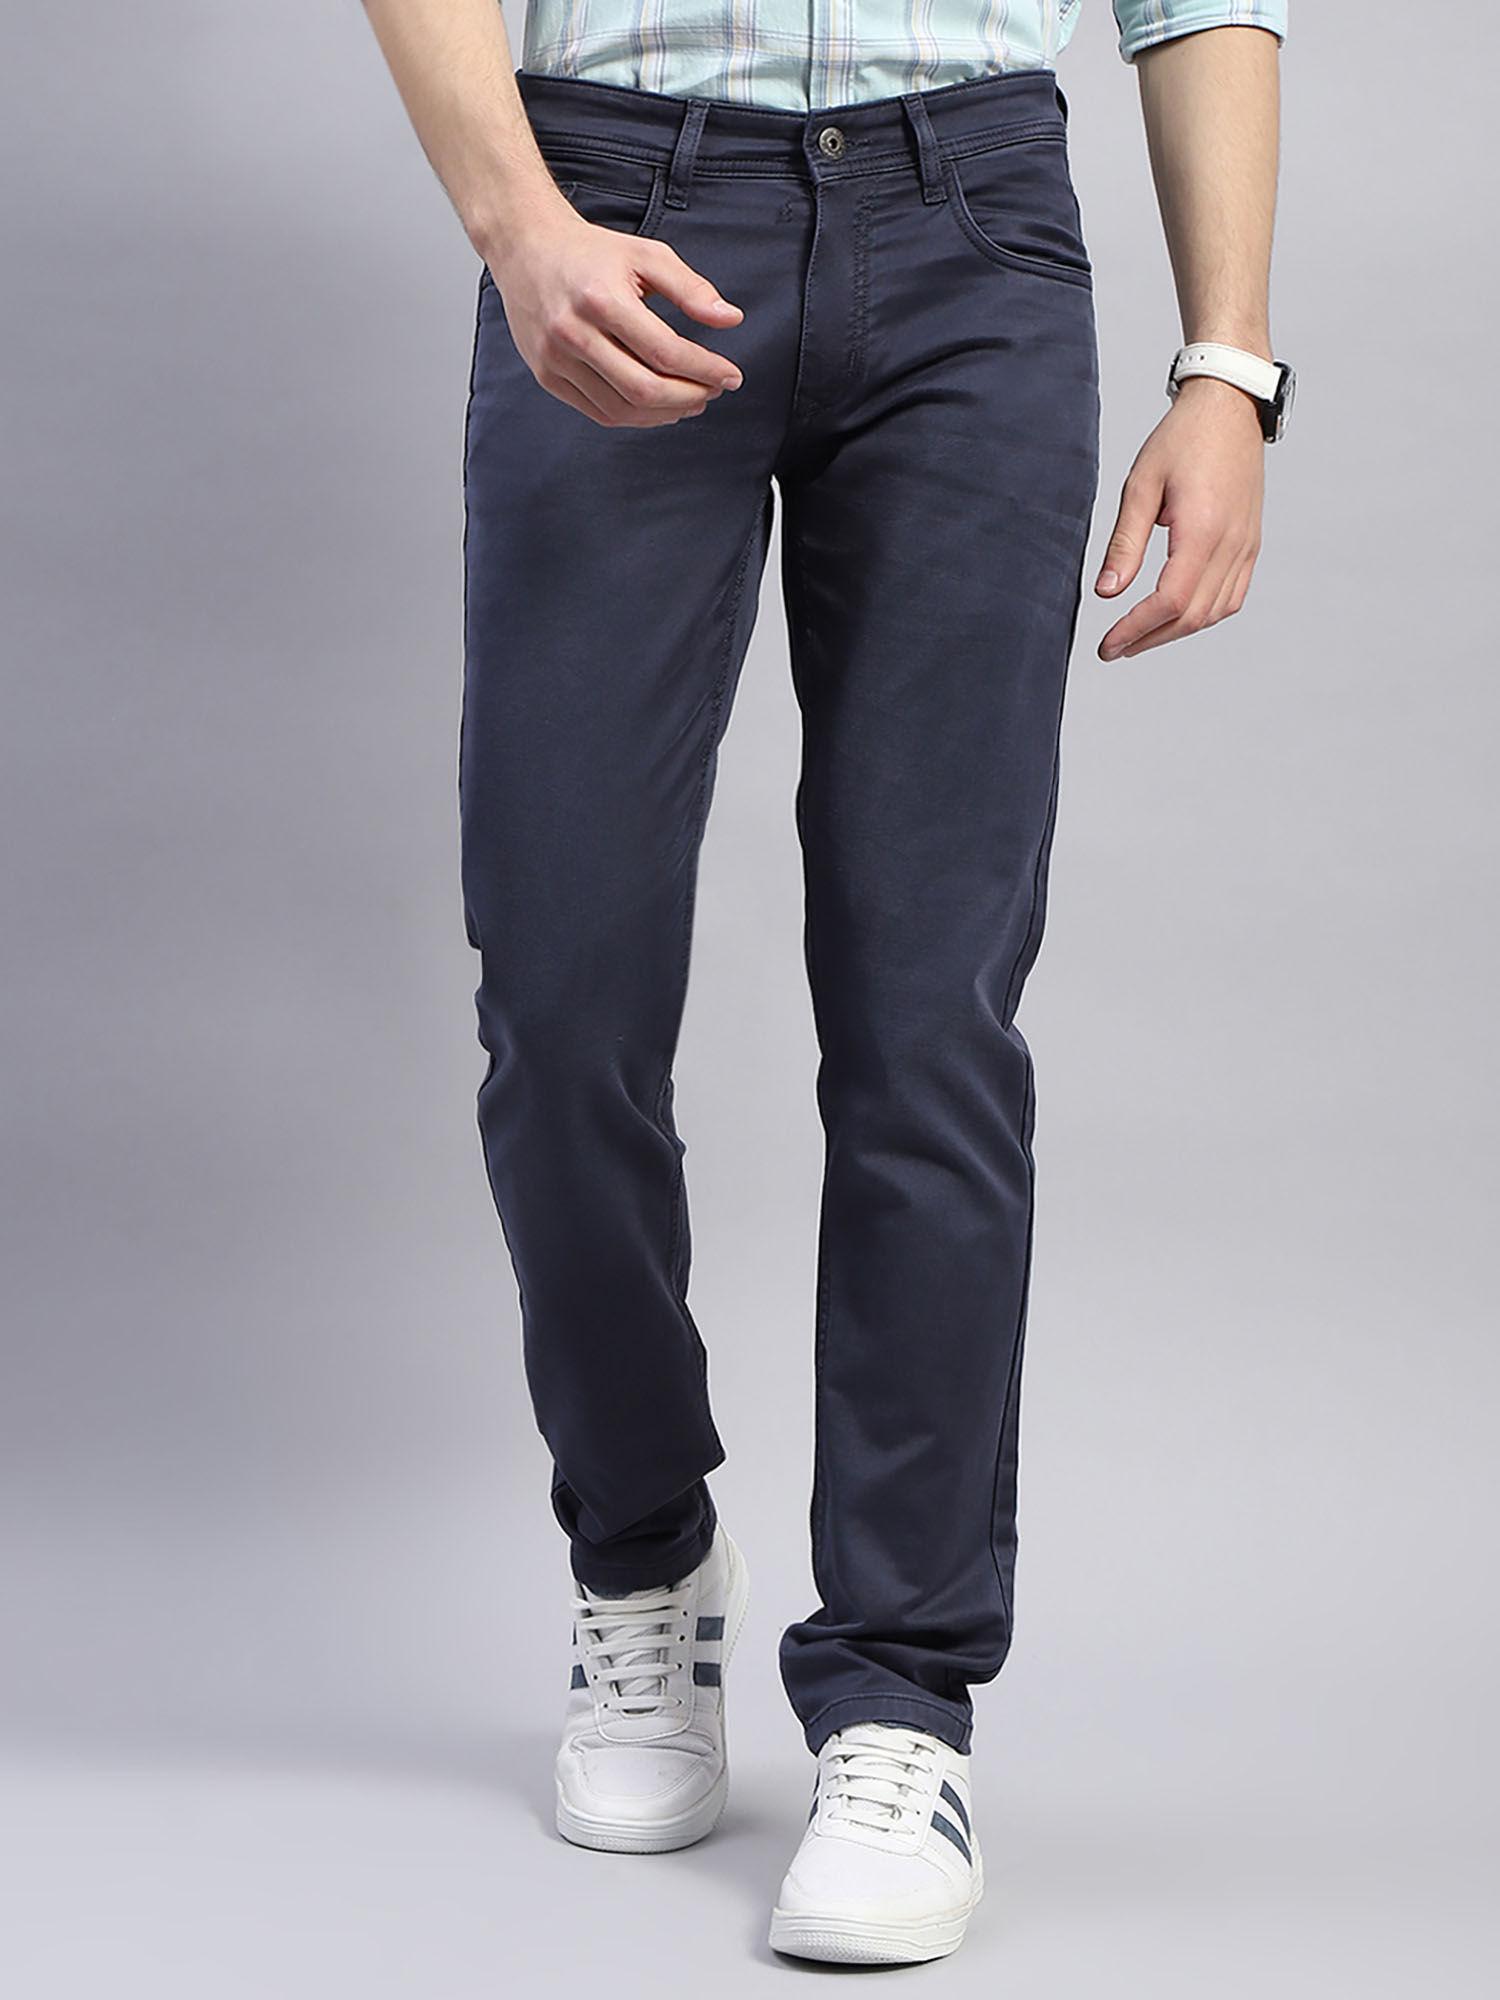 mens-solid-dark-grey-straight-fit-casual-jeans